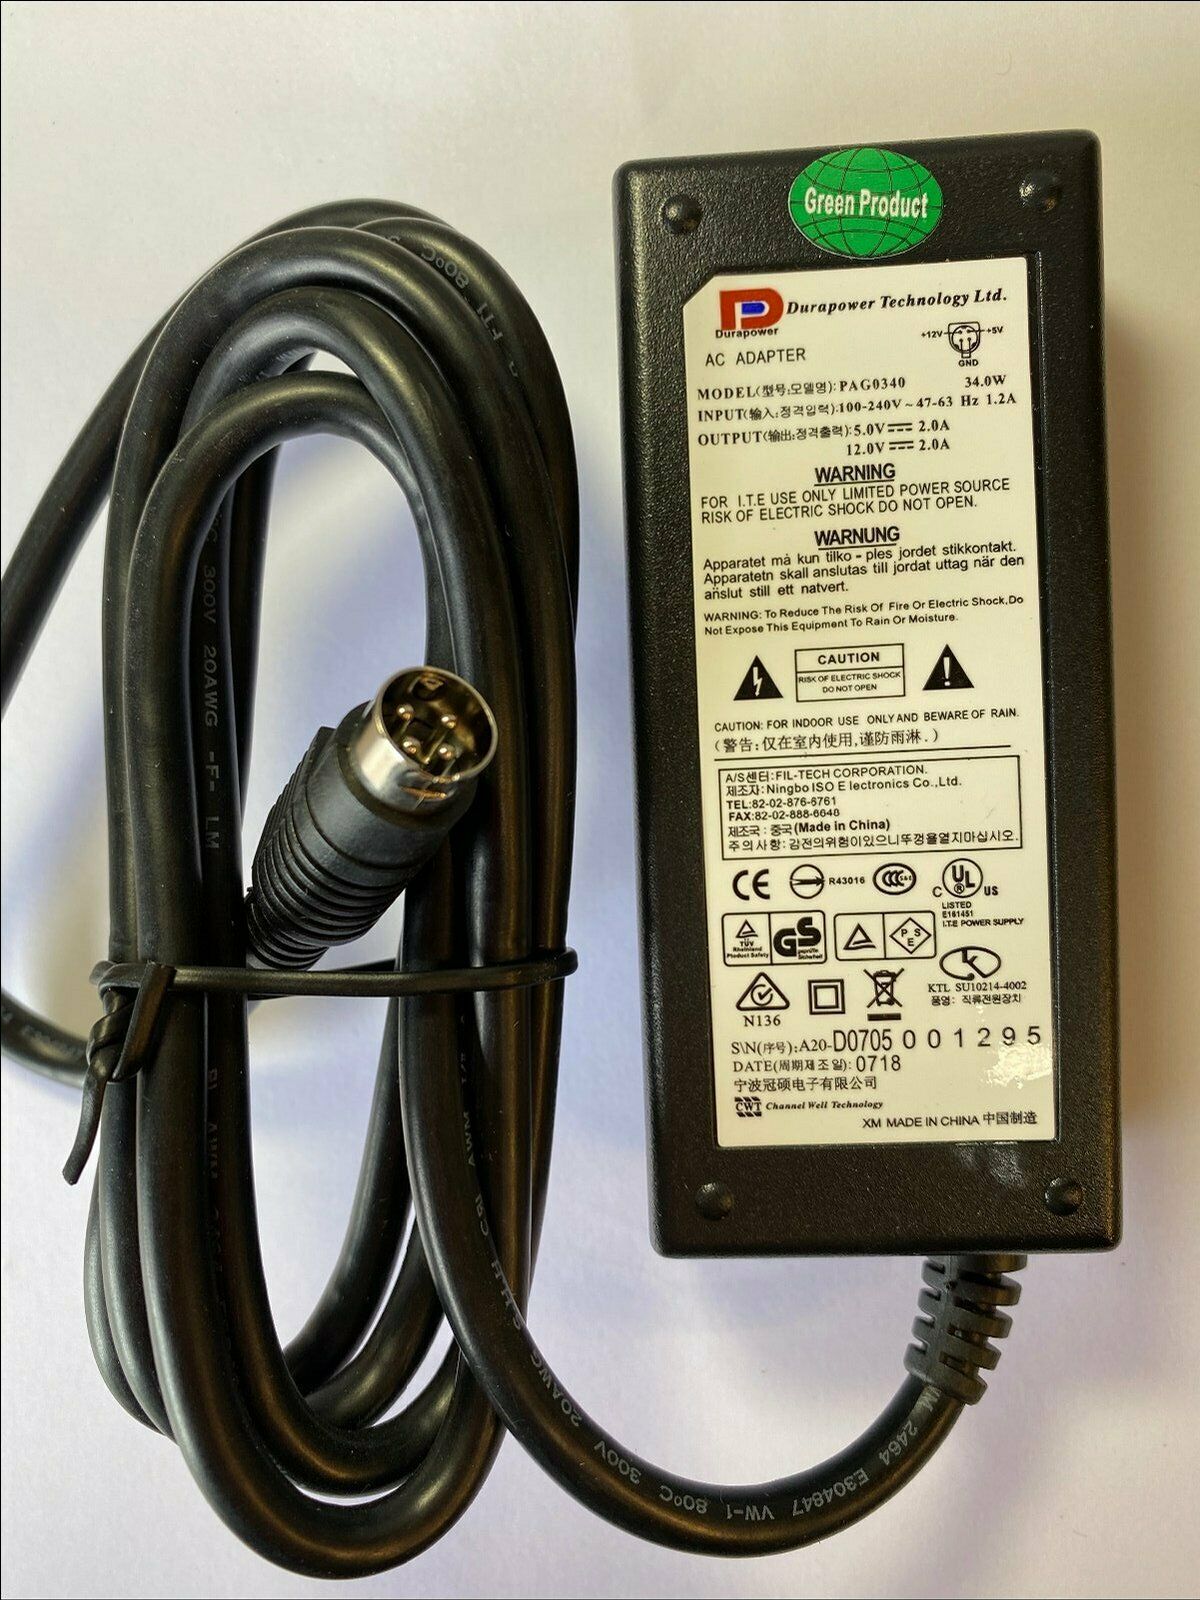 NEW Wattac BA0362ZI-8-A02 12VDC 5VDC 2.0A AC ADAPTER 4 PIN DIN 1-12V 2A 2-5V 2A Type: Power Adapter Manufacturer Wa